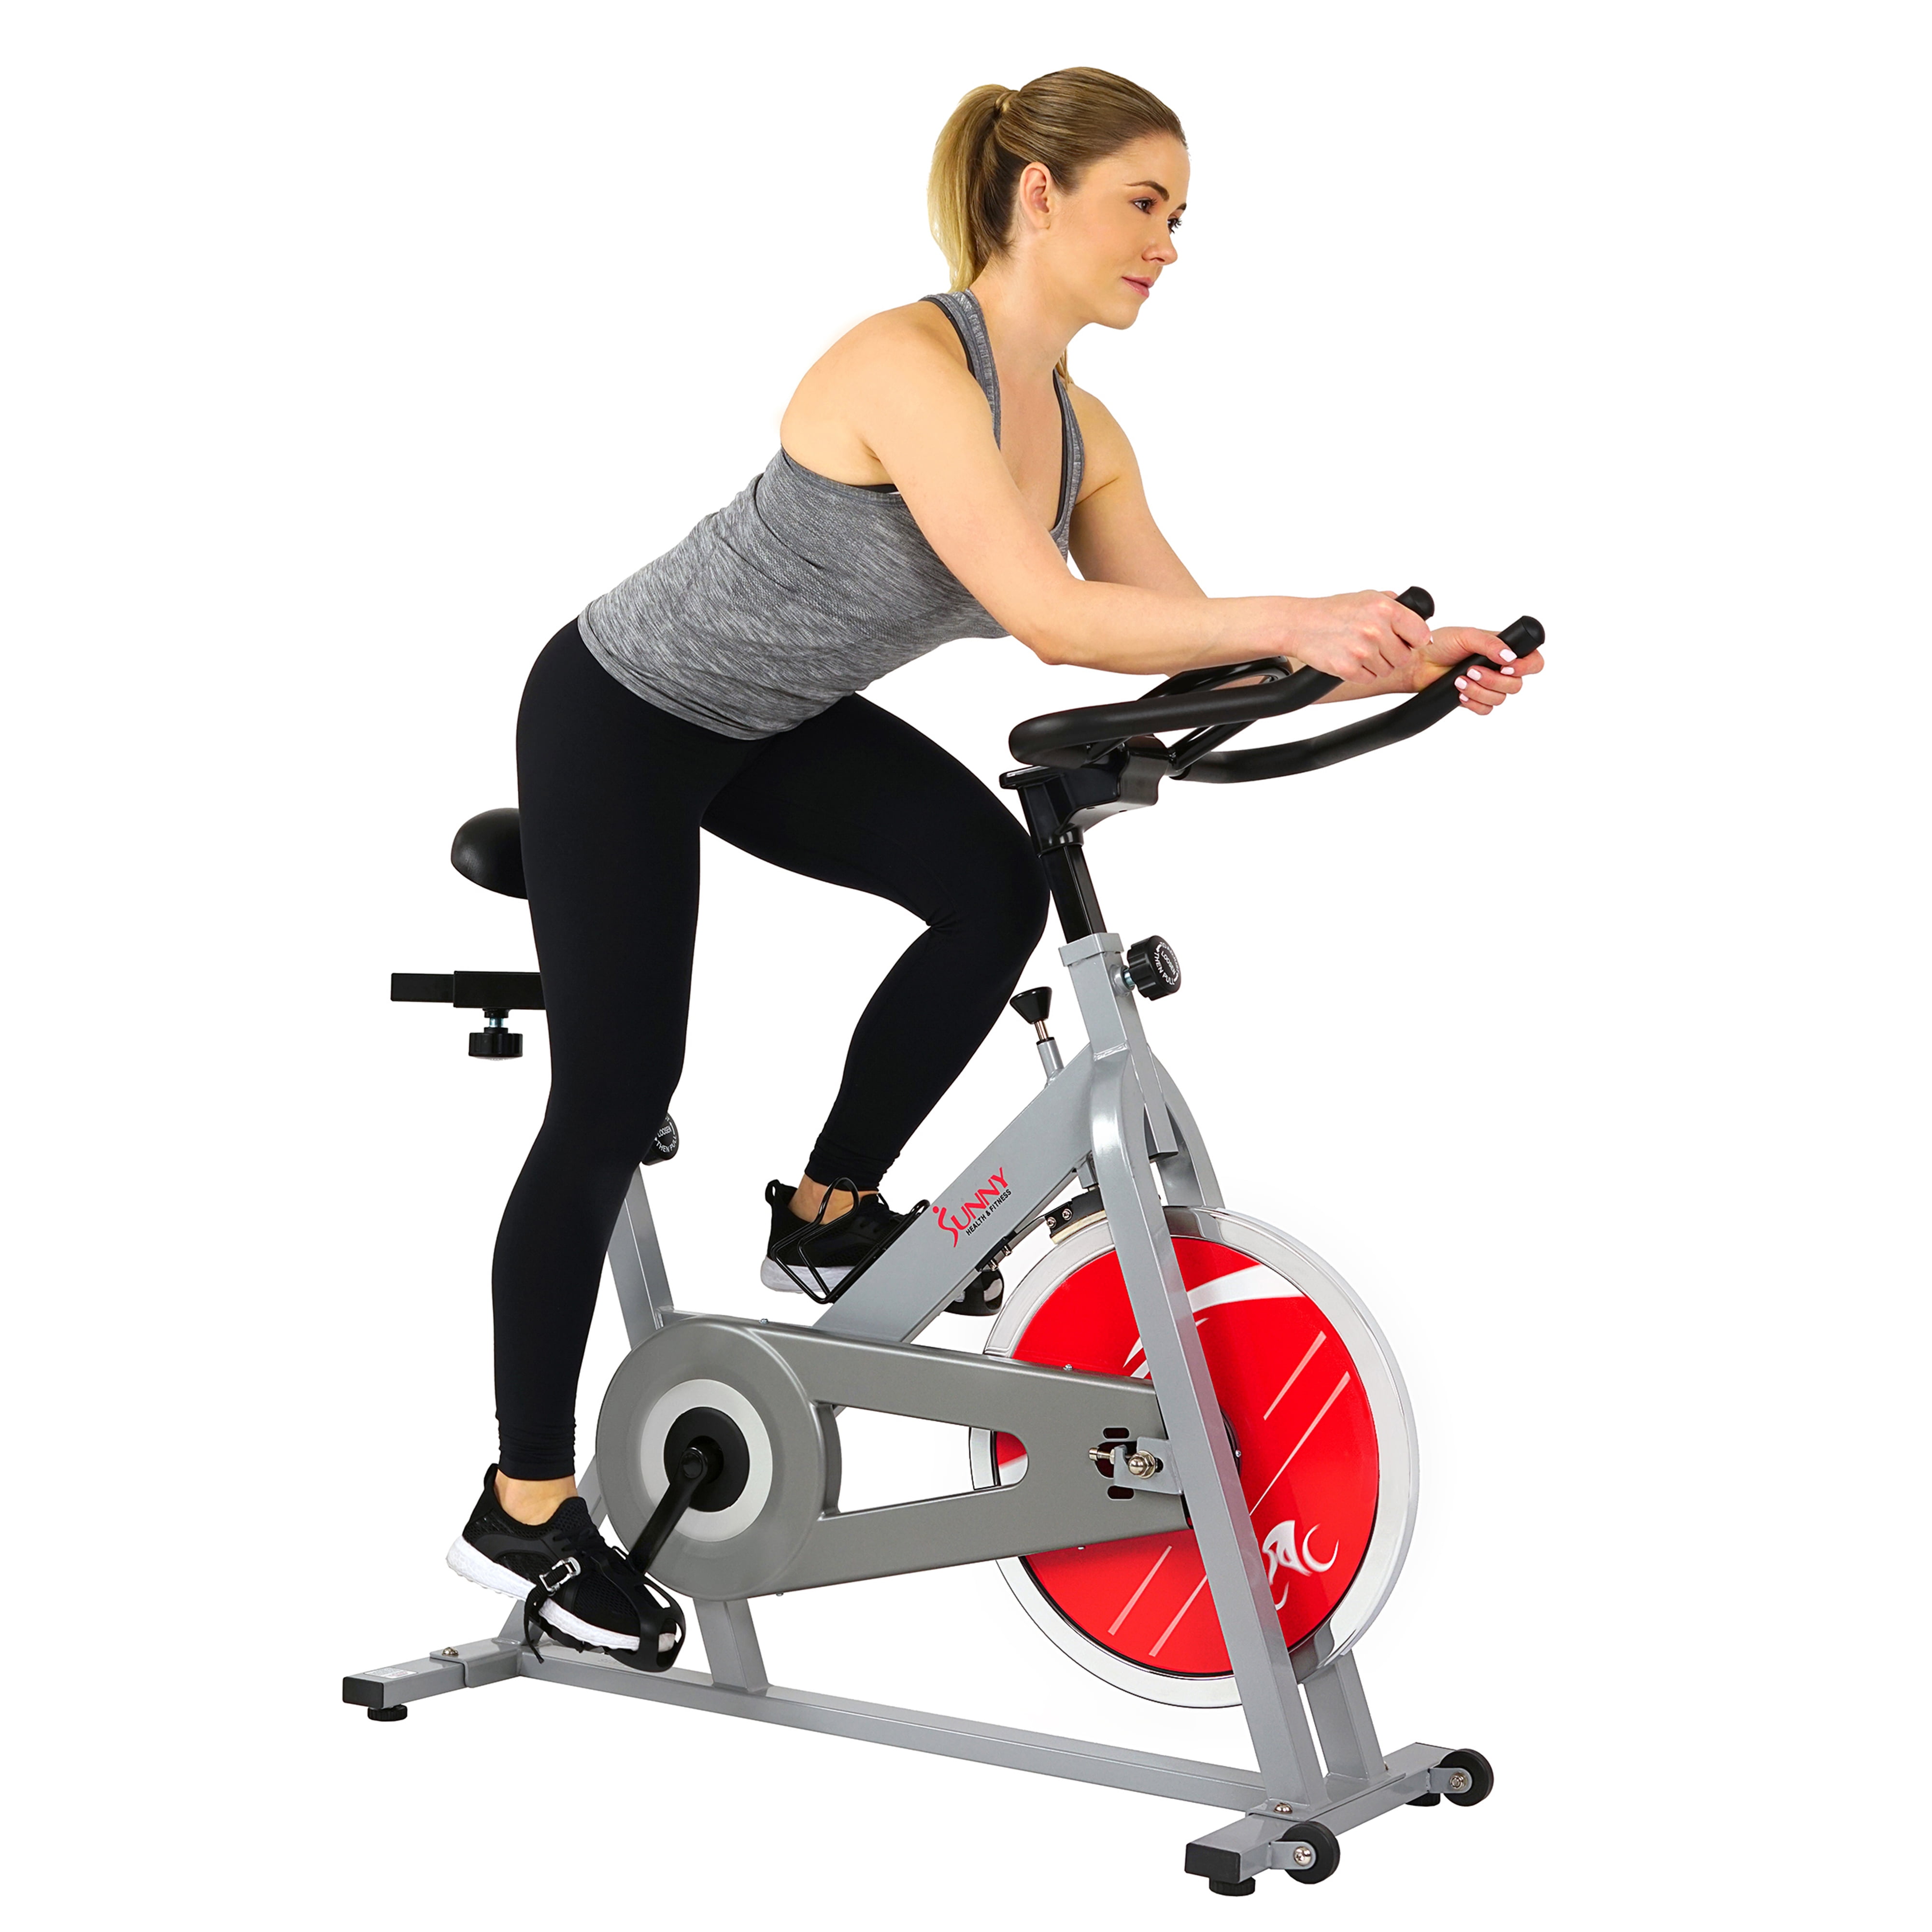 Sunny Health /& Fitness SF-B1203 Indoor Cycle Trainer Bike for sale online